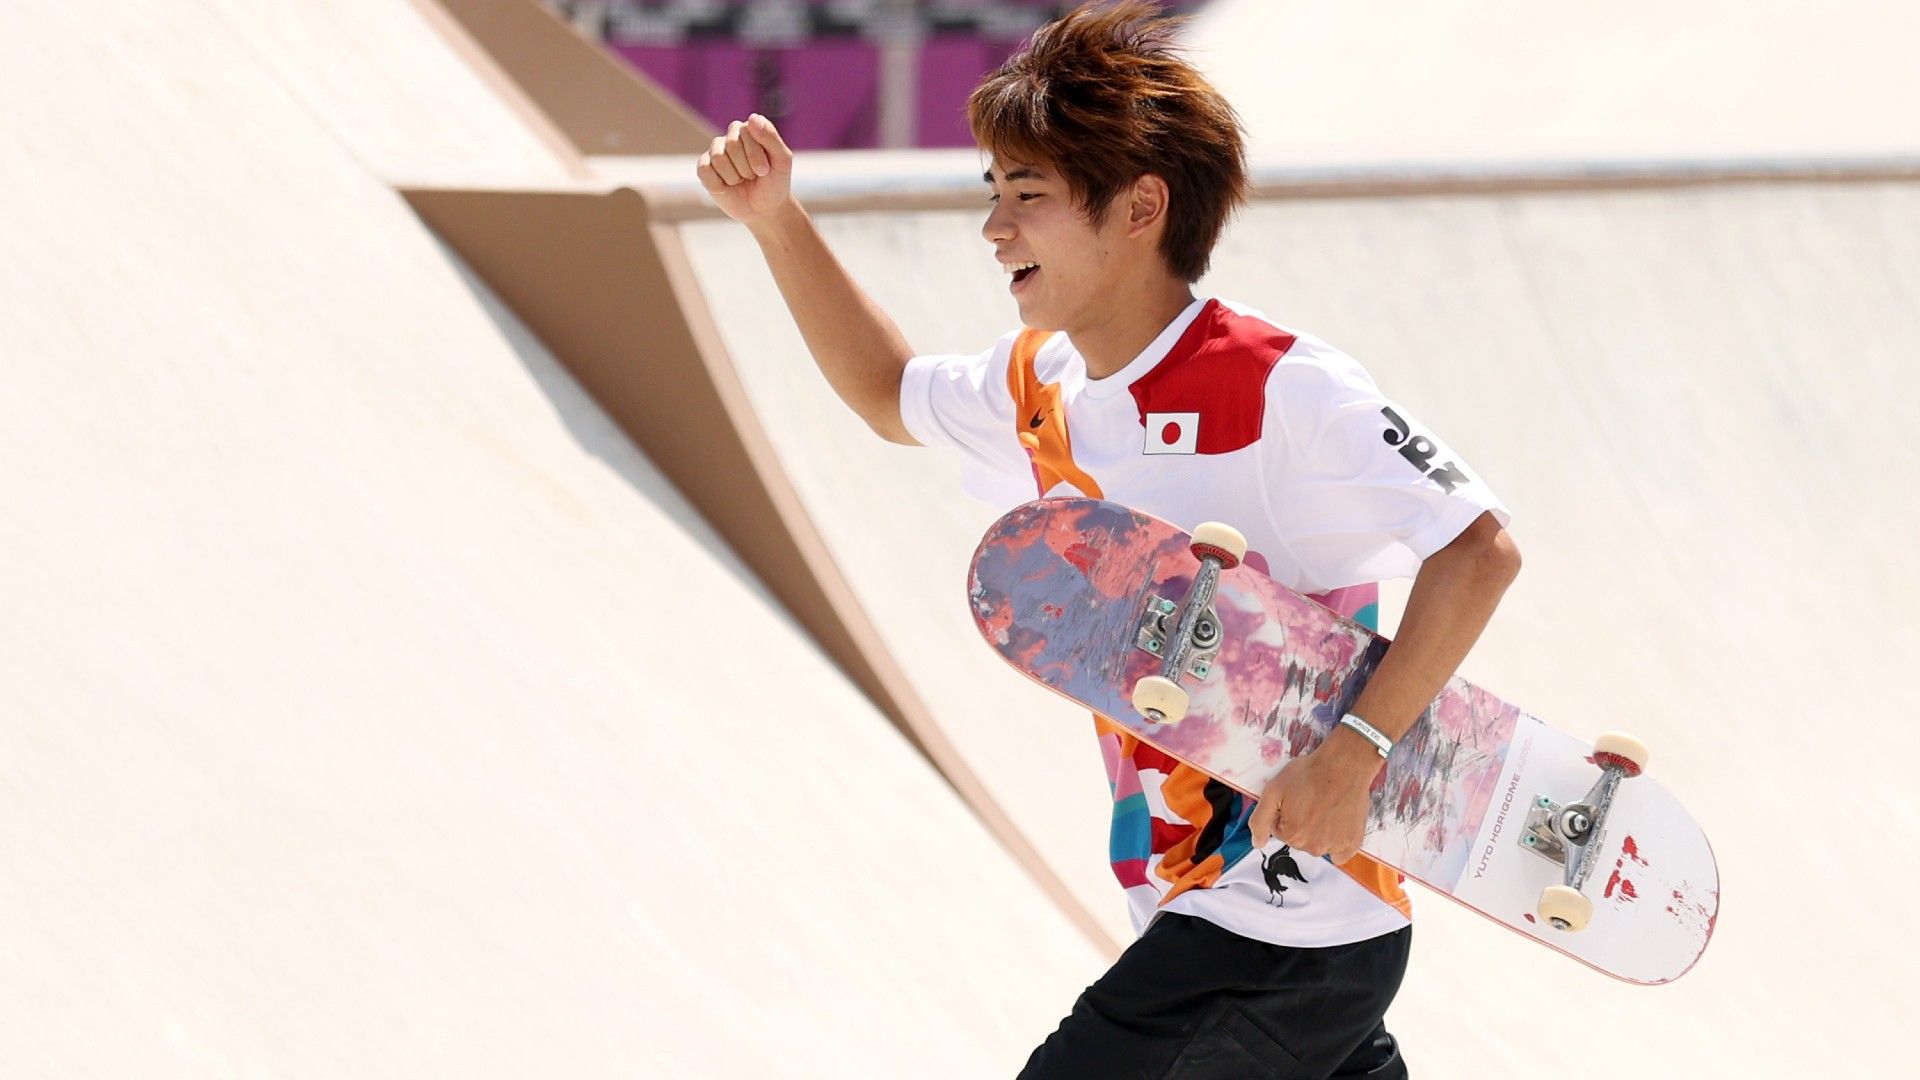 Japan's Horigome wins first-ever skateboarding competition at the Olympic Games